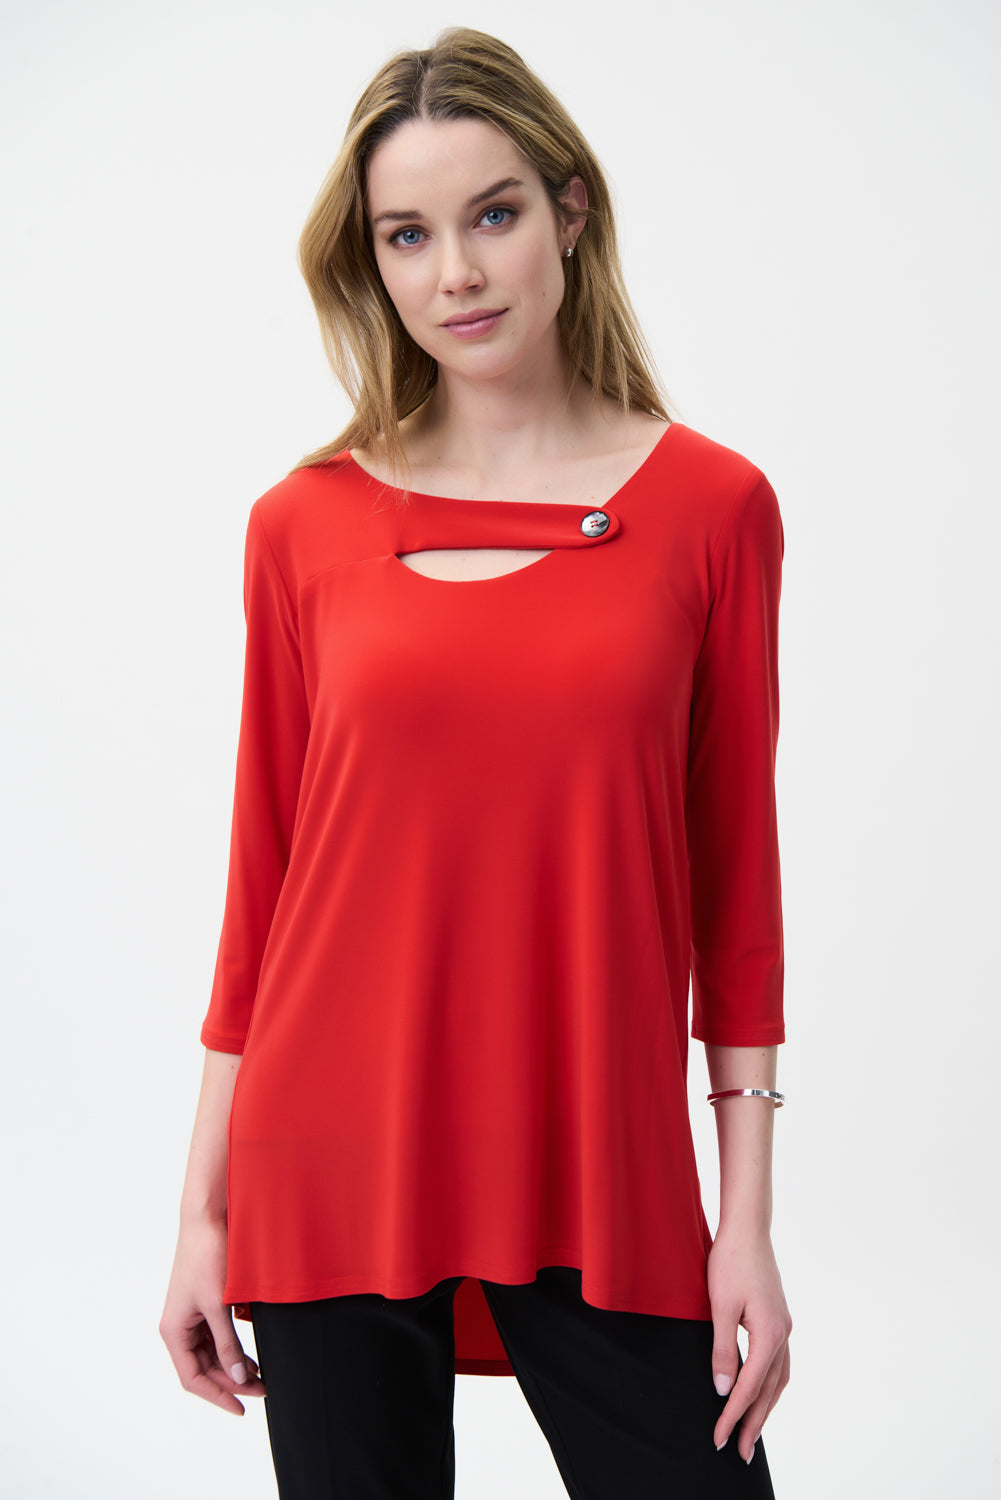 Joseph Ribkoff Lacquer Red Cut-Out Detail Top Style 221144